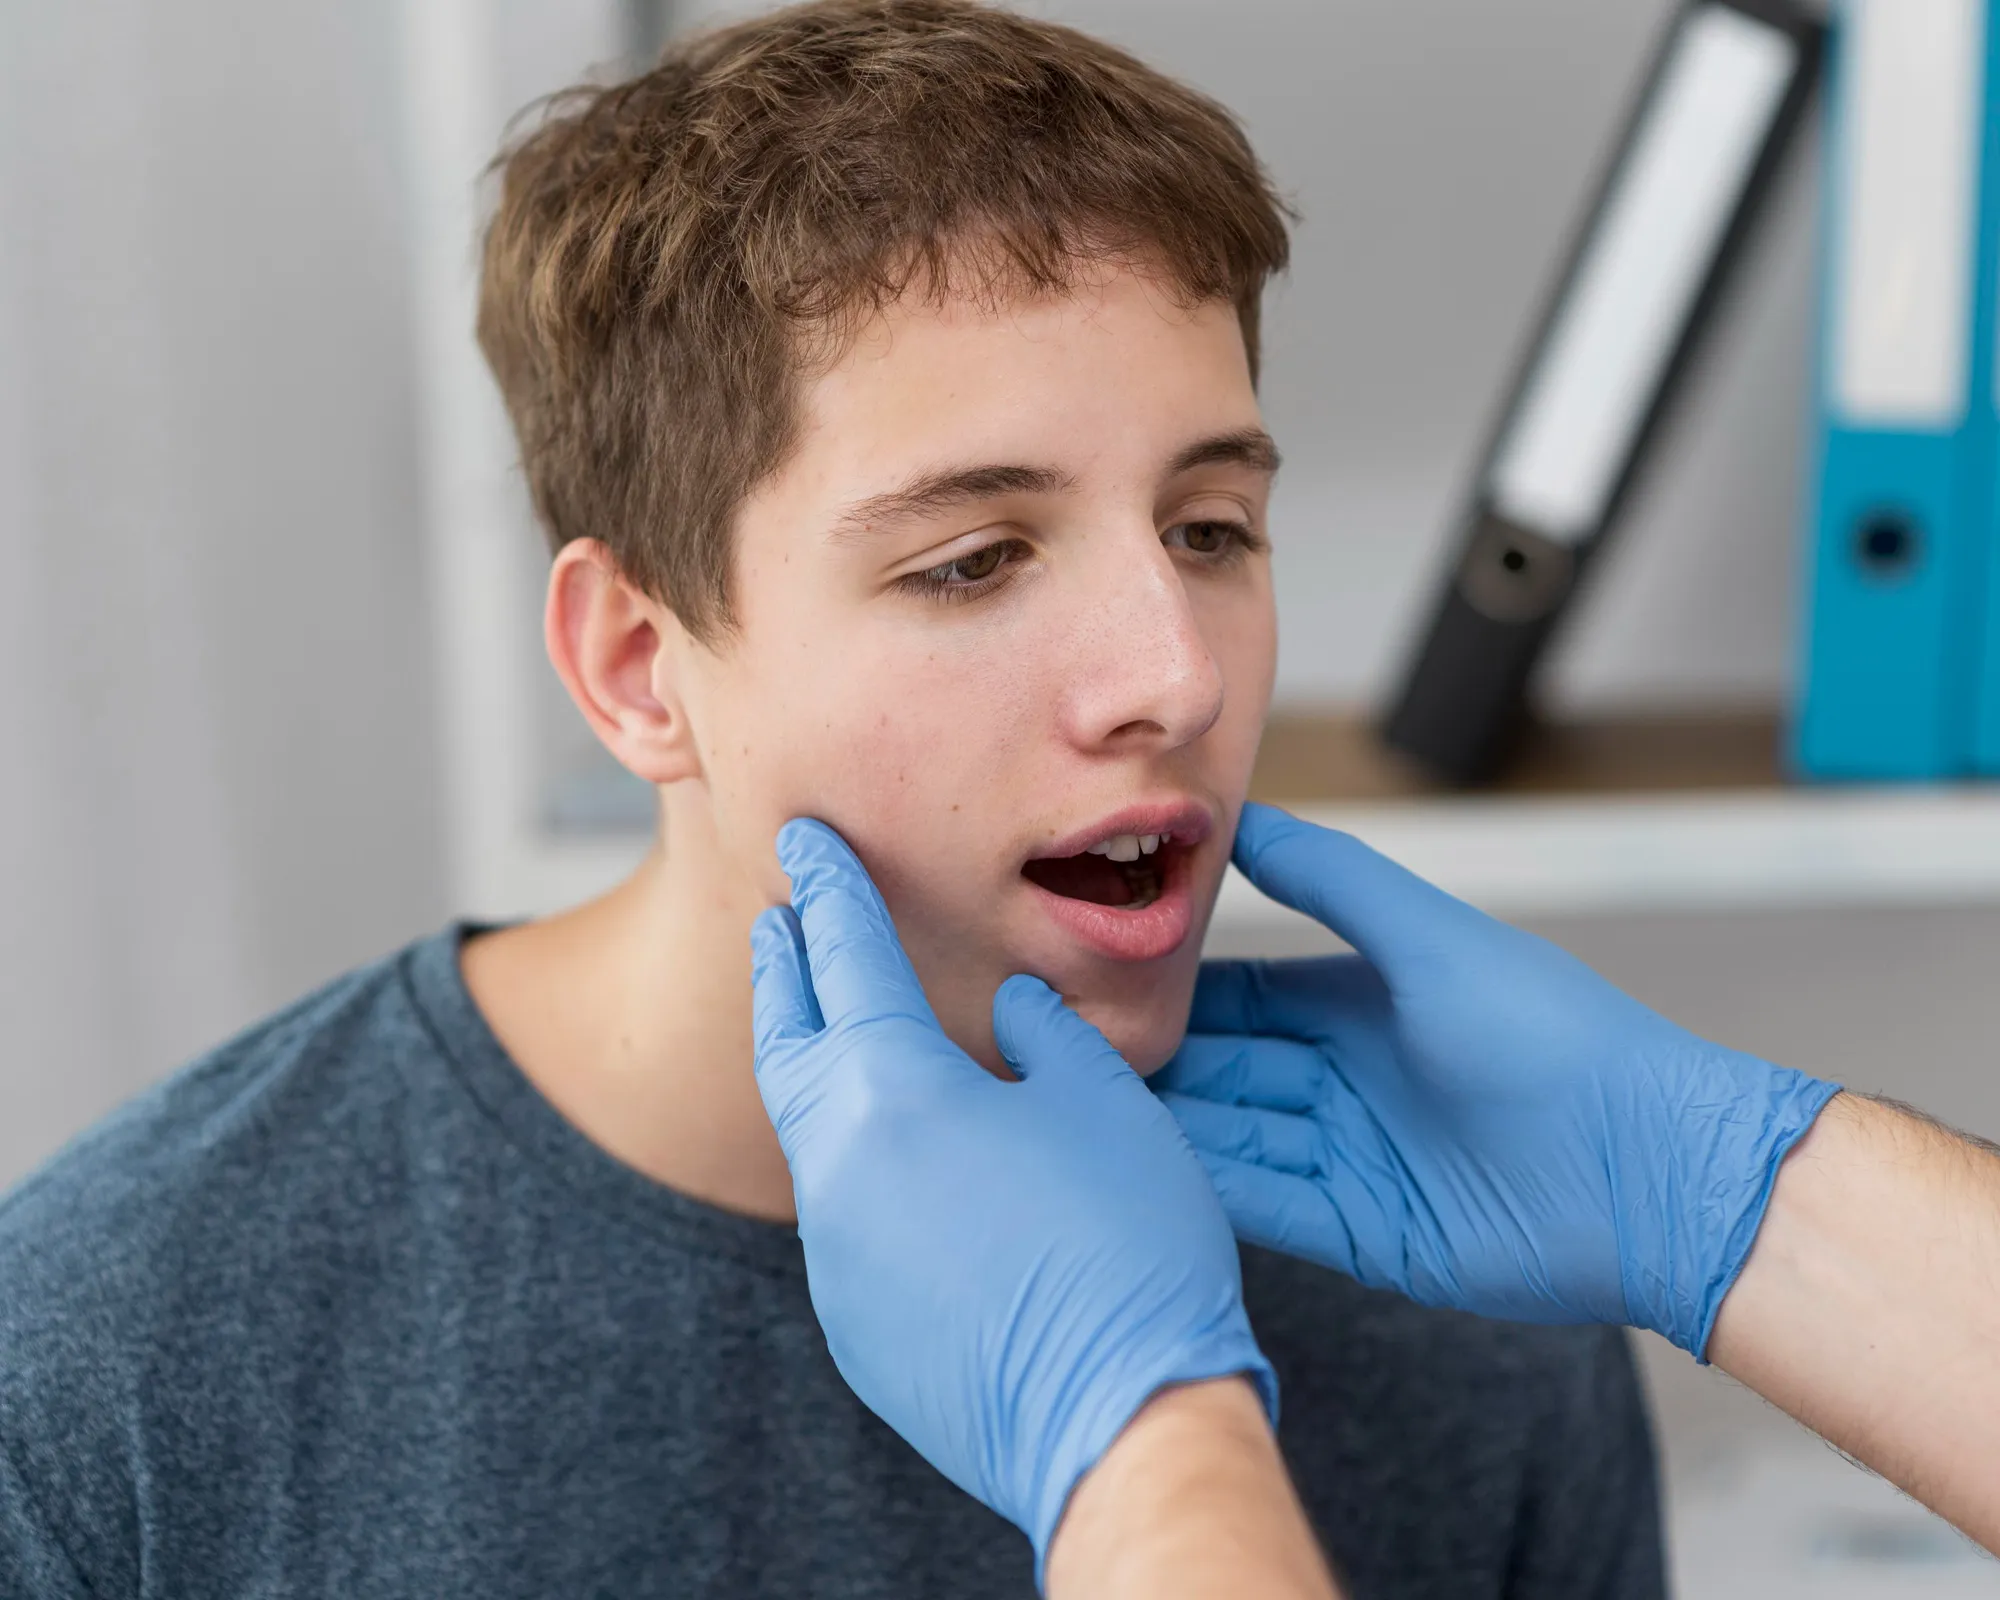 Can dentists treat and remove tonsil stones